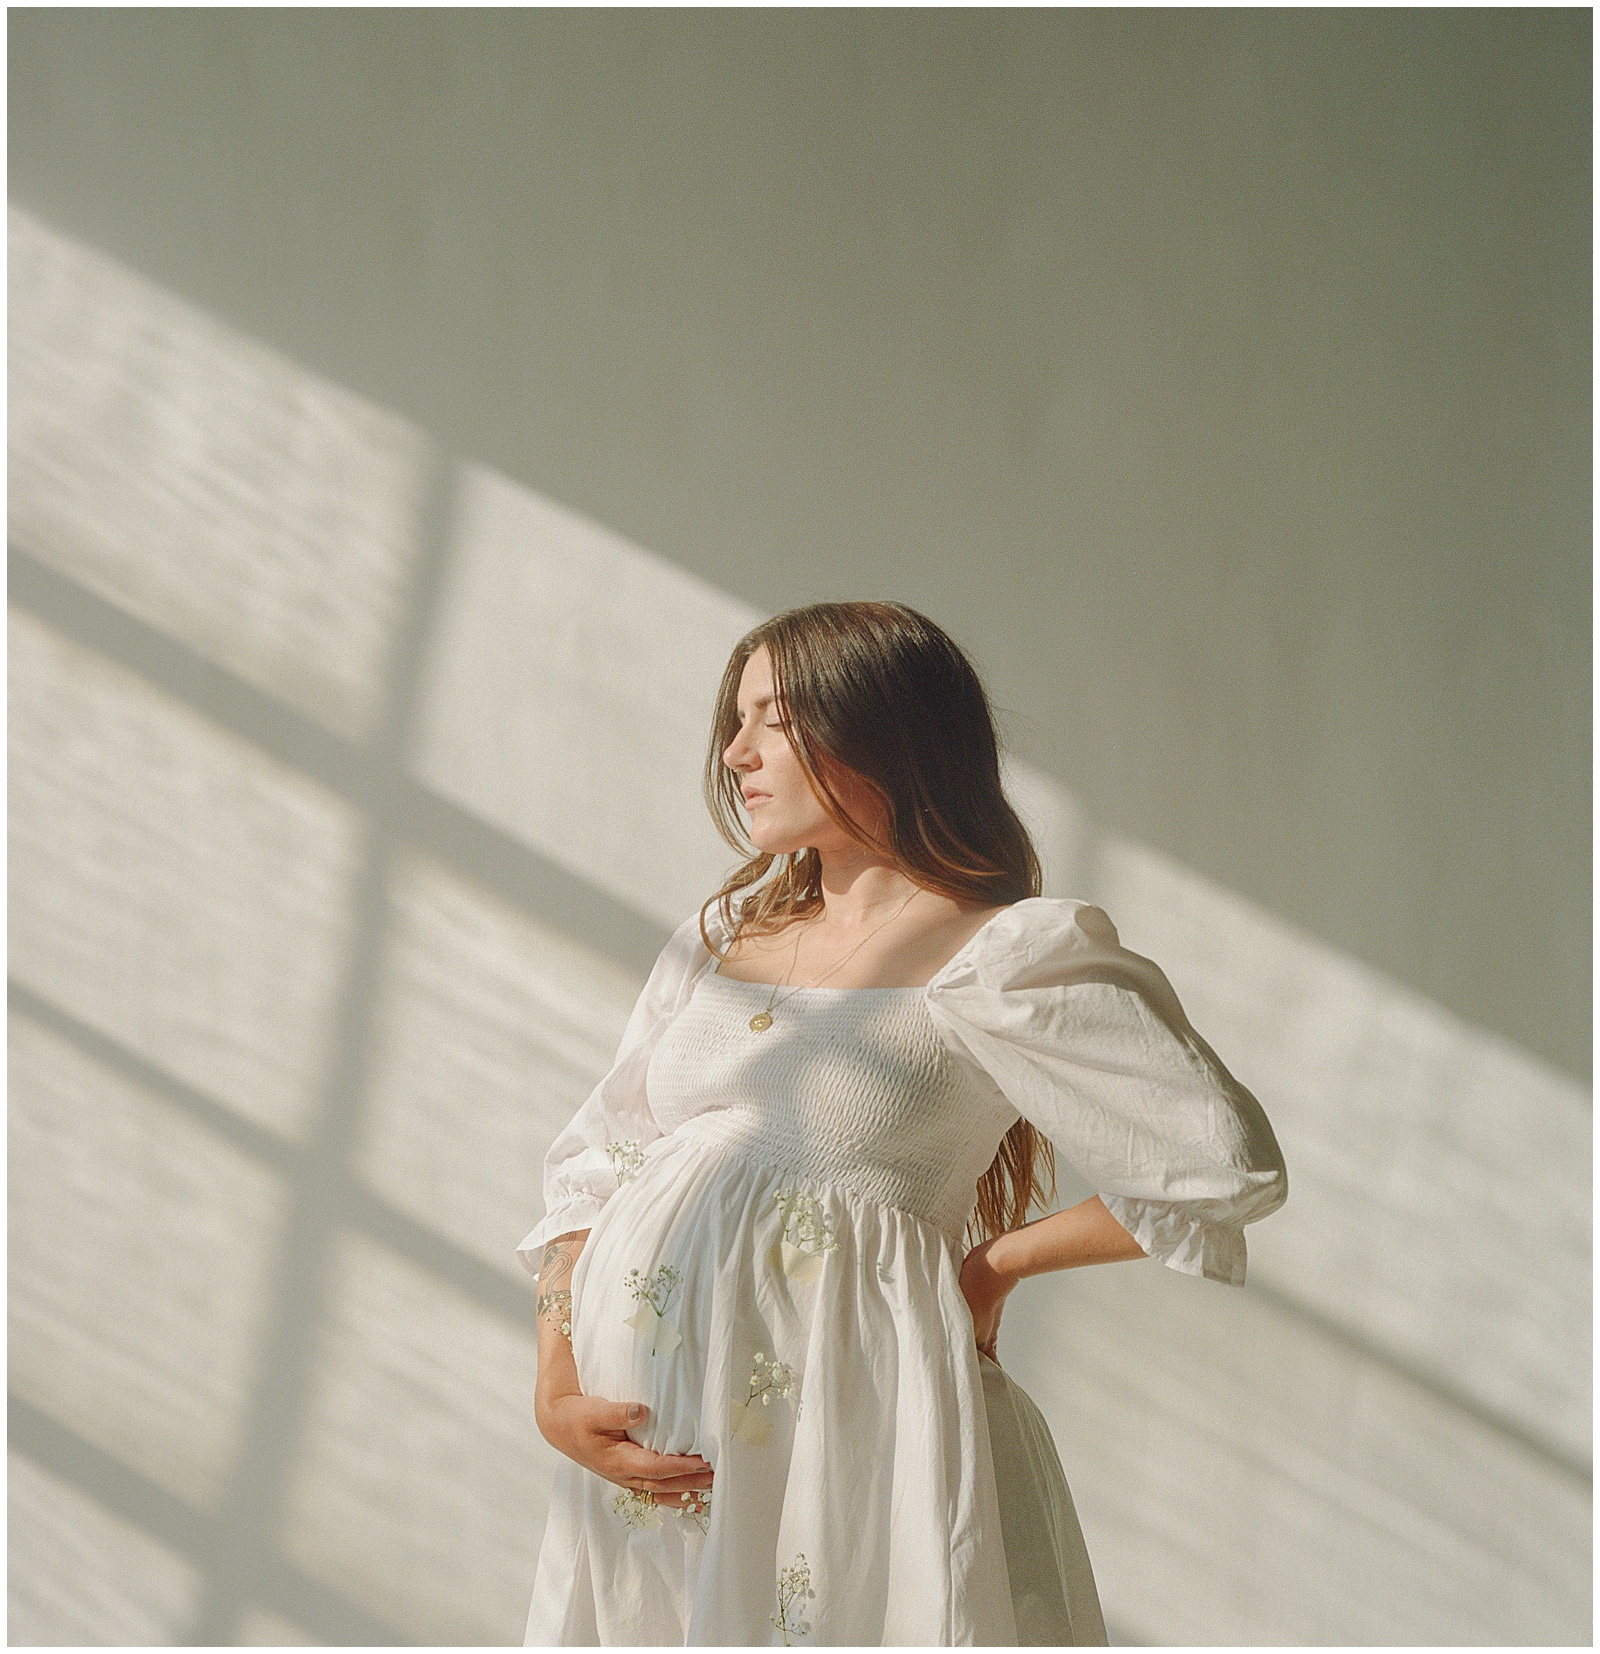 Nicole puts a hand on her baby bump in her studio maternity photos.